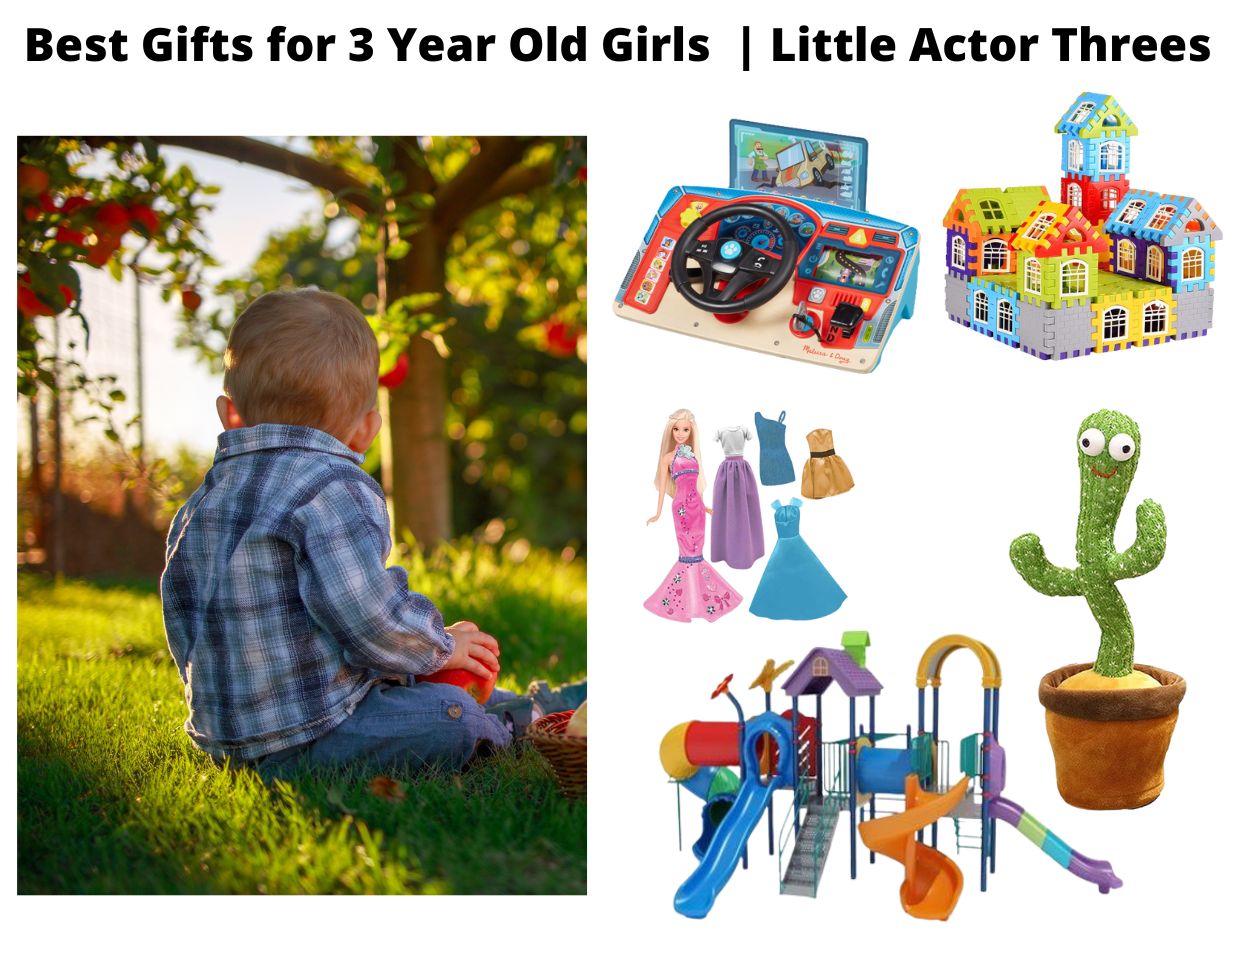 Best Gifts for 3 Year Old Girls Little Actor Threes